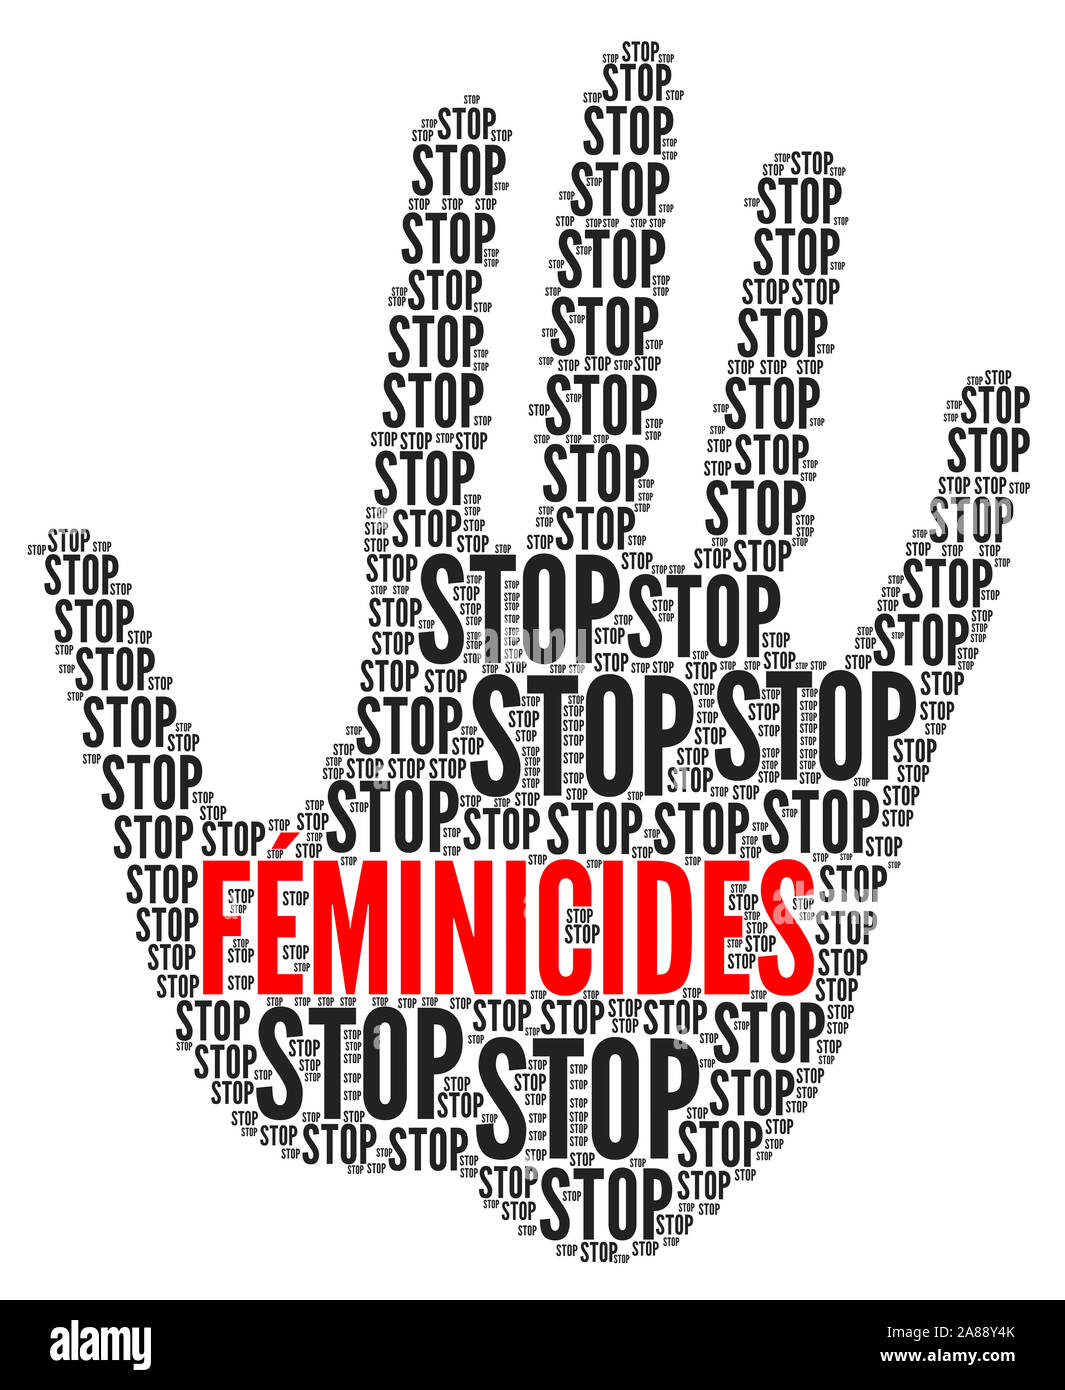 Stop femicide symbol concept illustration in french language Stock Photo